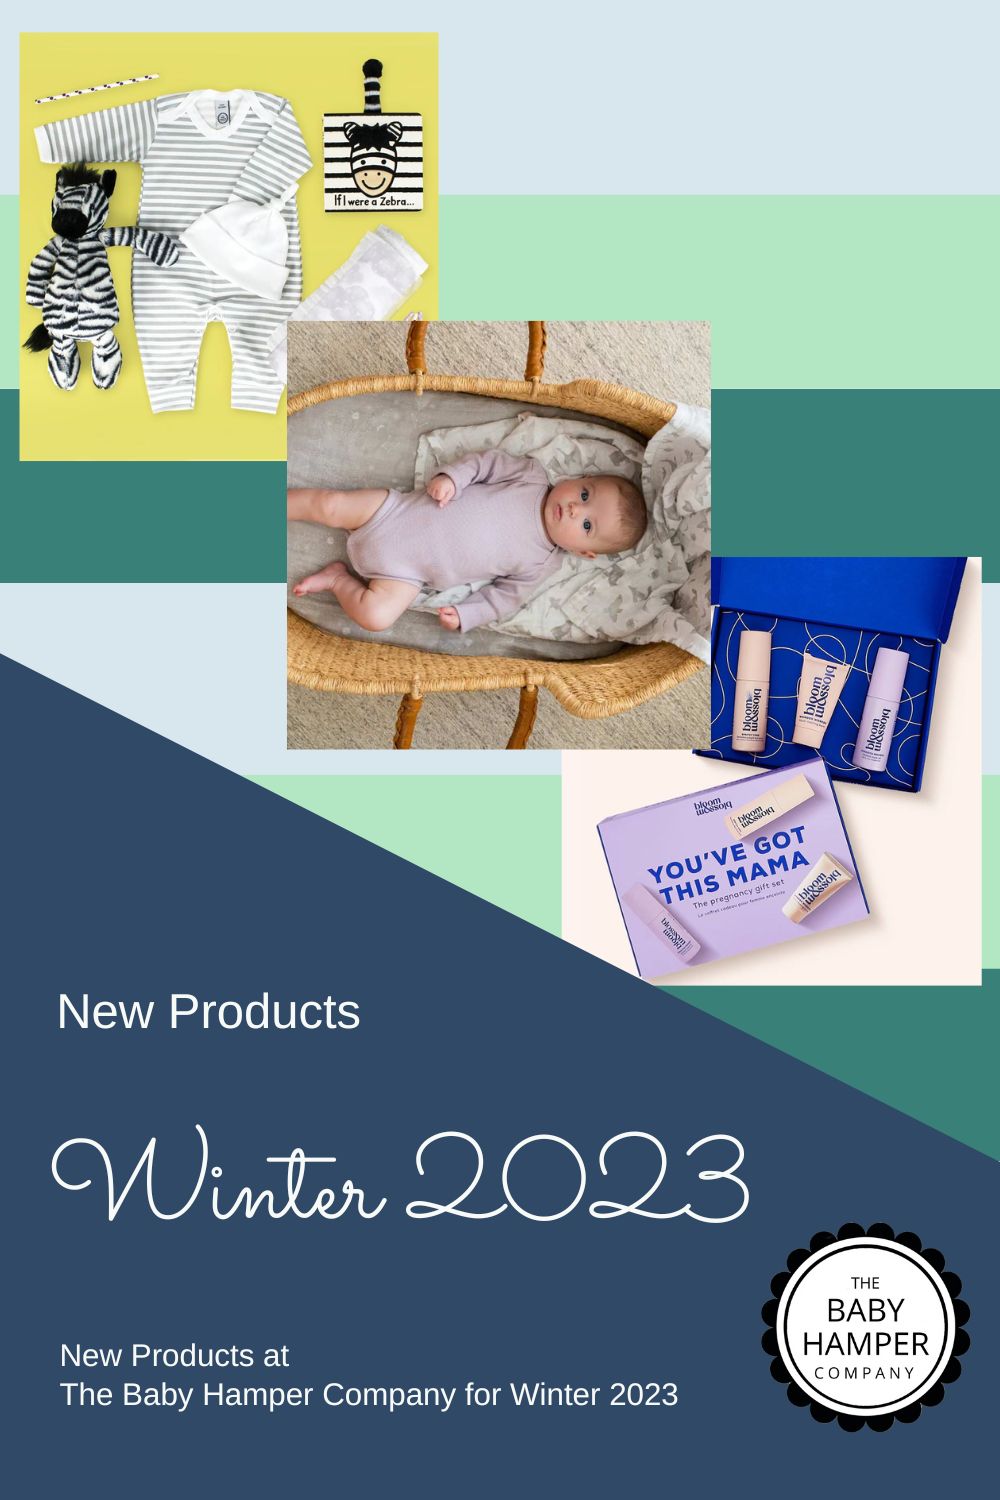 New products at The Baby Hamper Company for Winter 2023